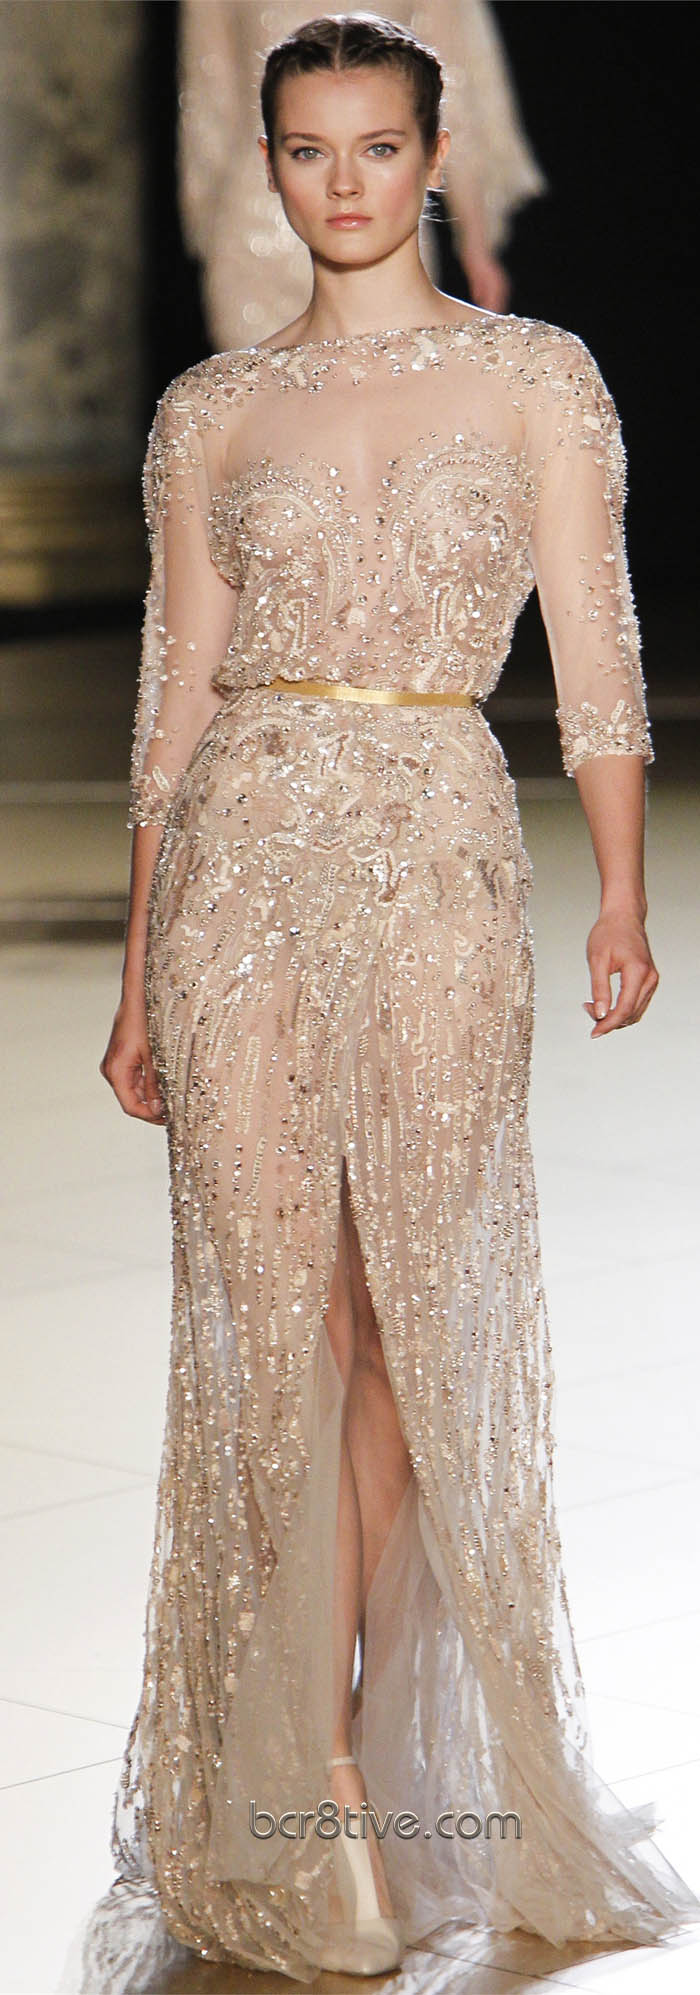 Elie Saab Fall Winter 2012 Couture – Be Creative